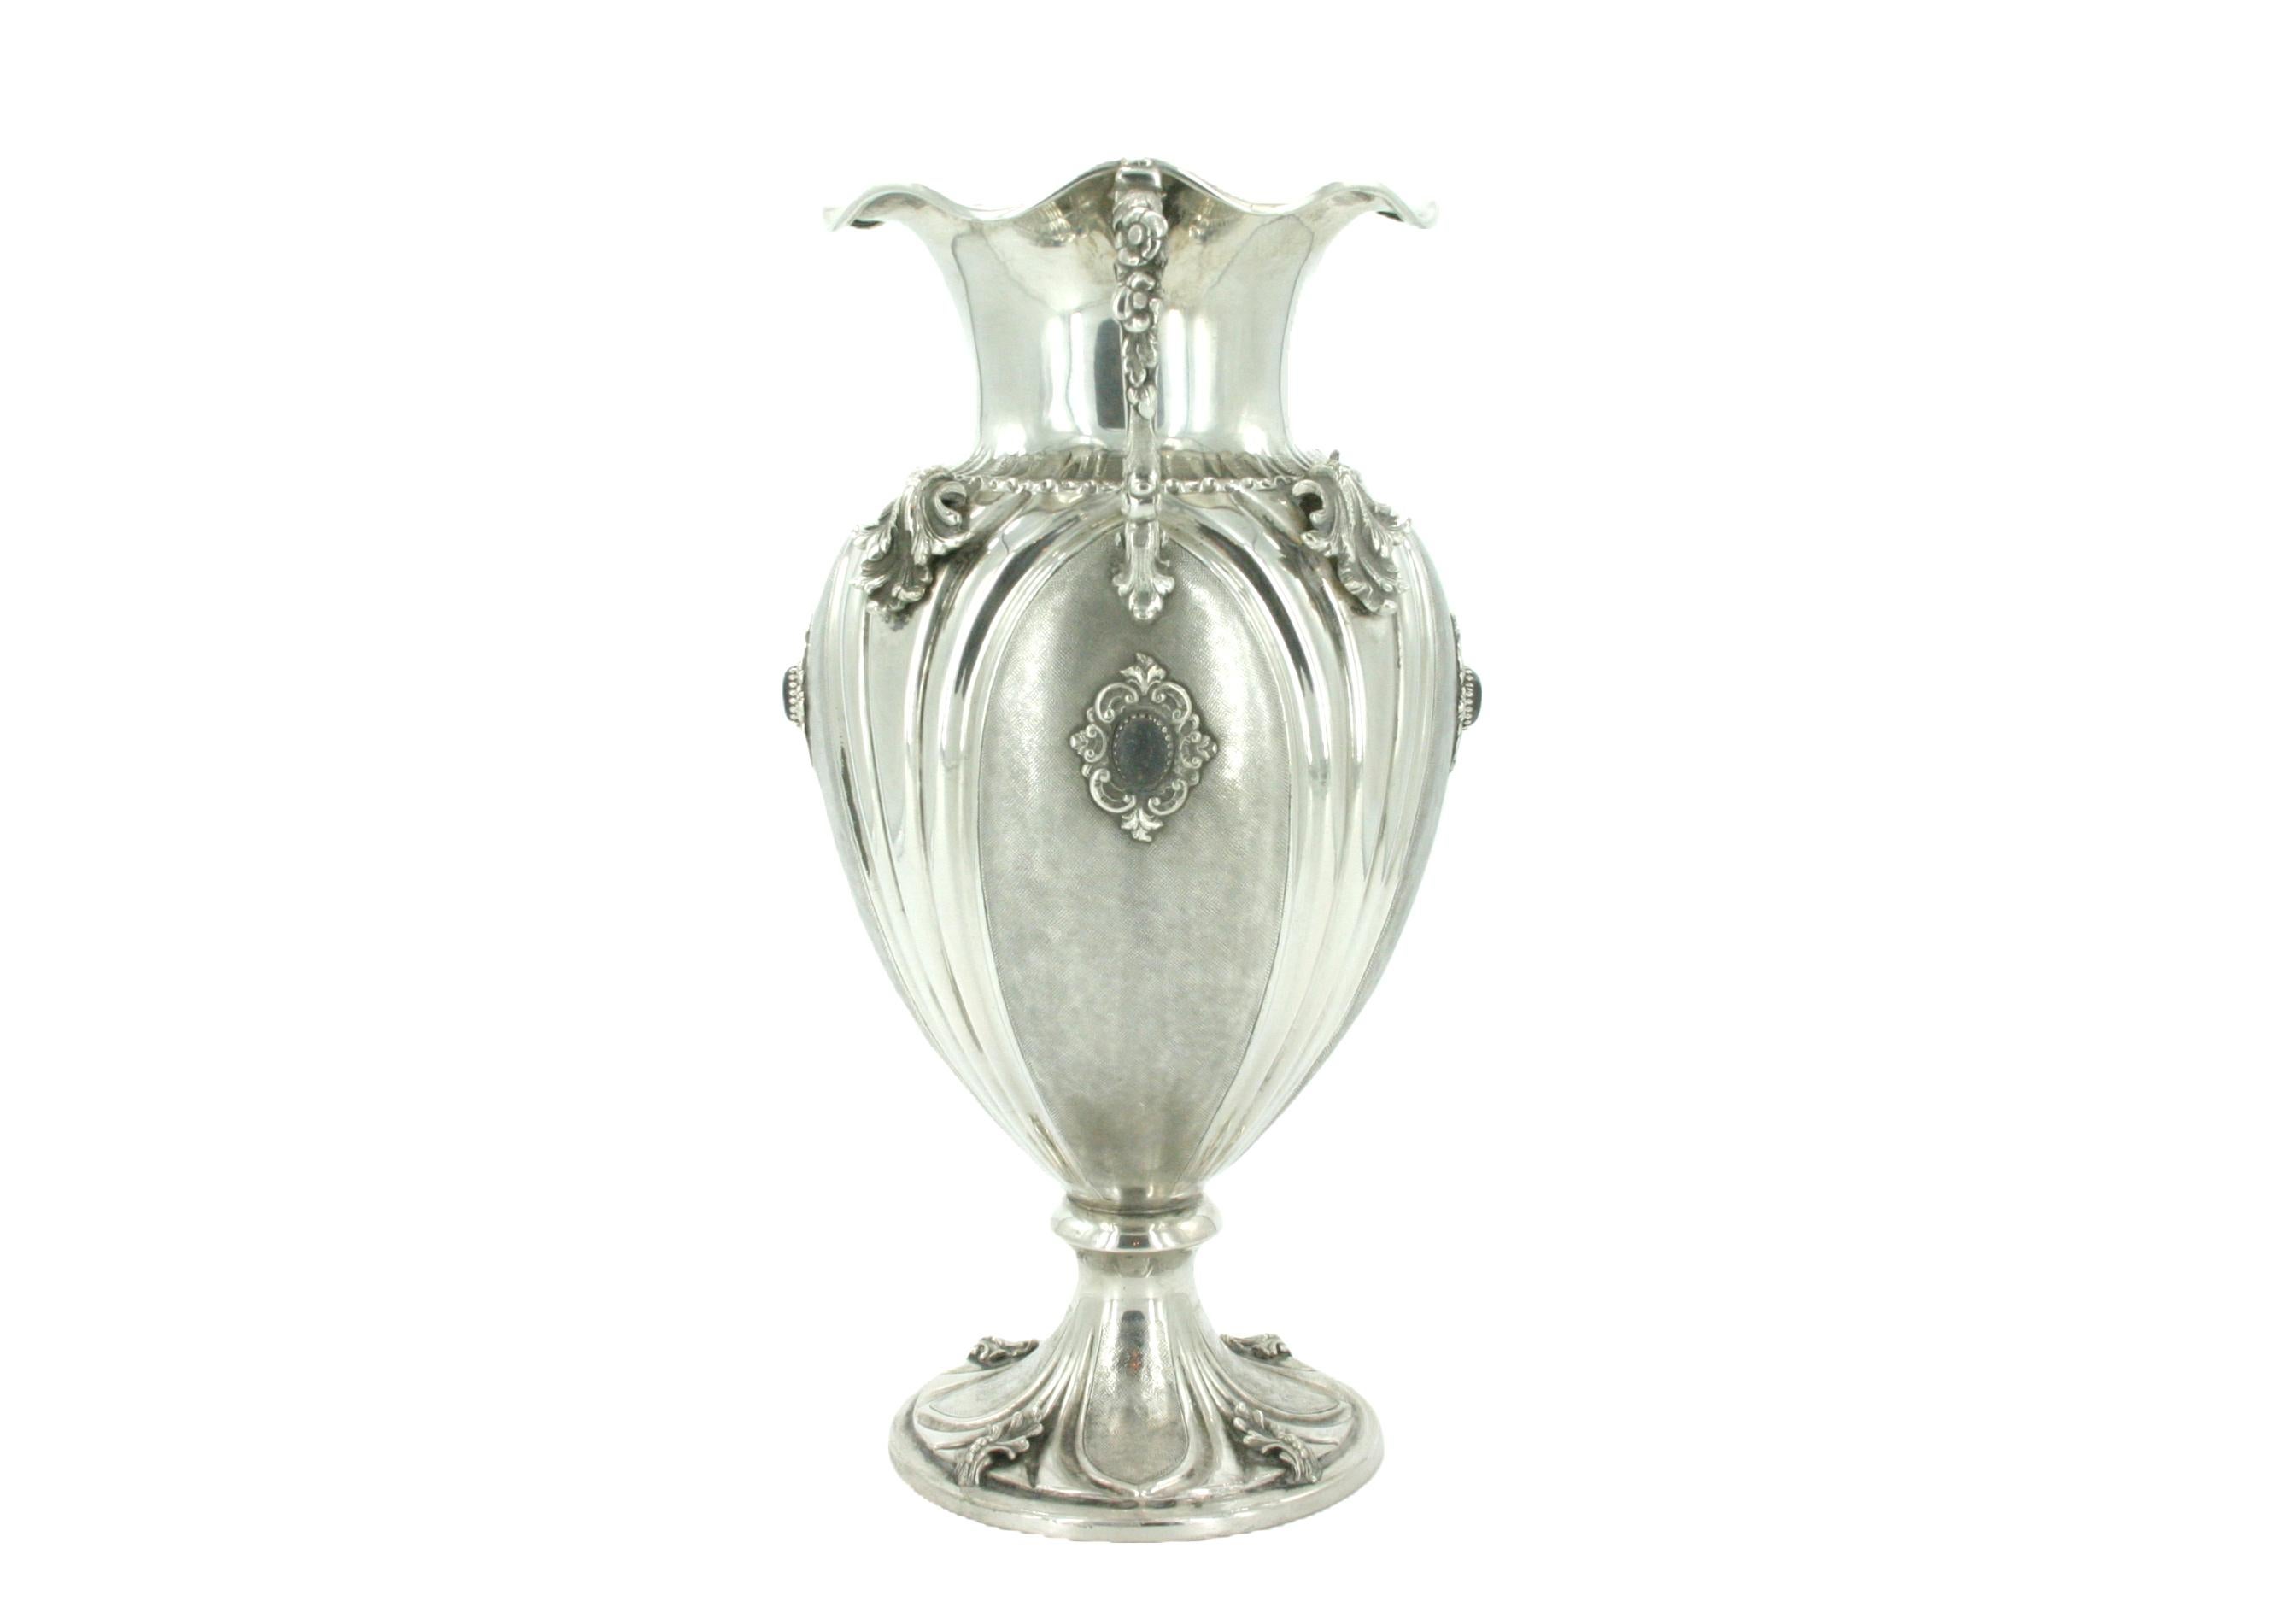 19th Century Italian sterling silver decorative vase with two side handles and exterior design details. The vase features a finely chase body with applied foliate motifs and semi precious stones. The vase is in great condition. Minor wear. Impressed